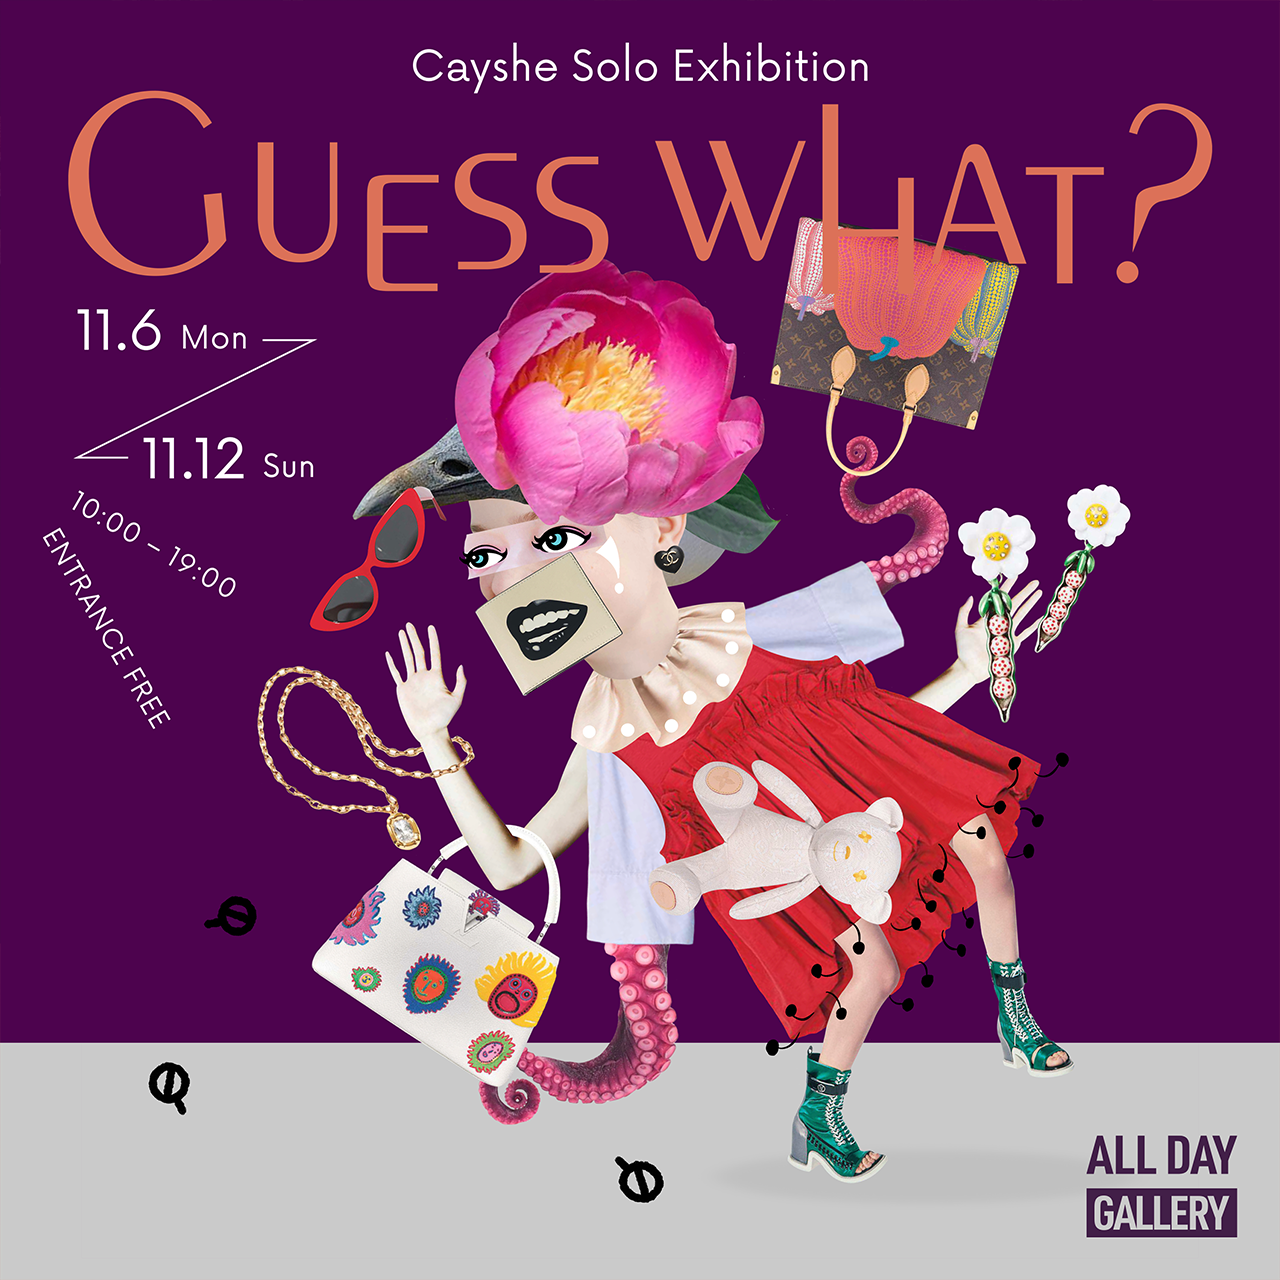 Cayshe Solo Exhibition “Guess what?”